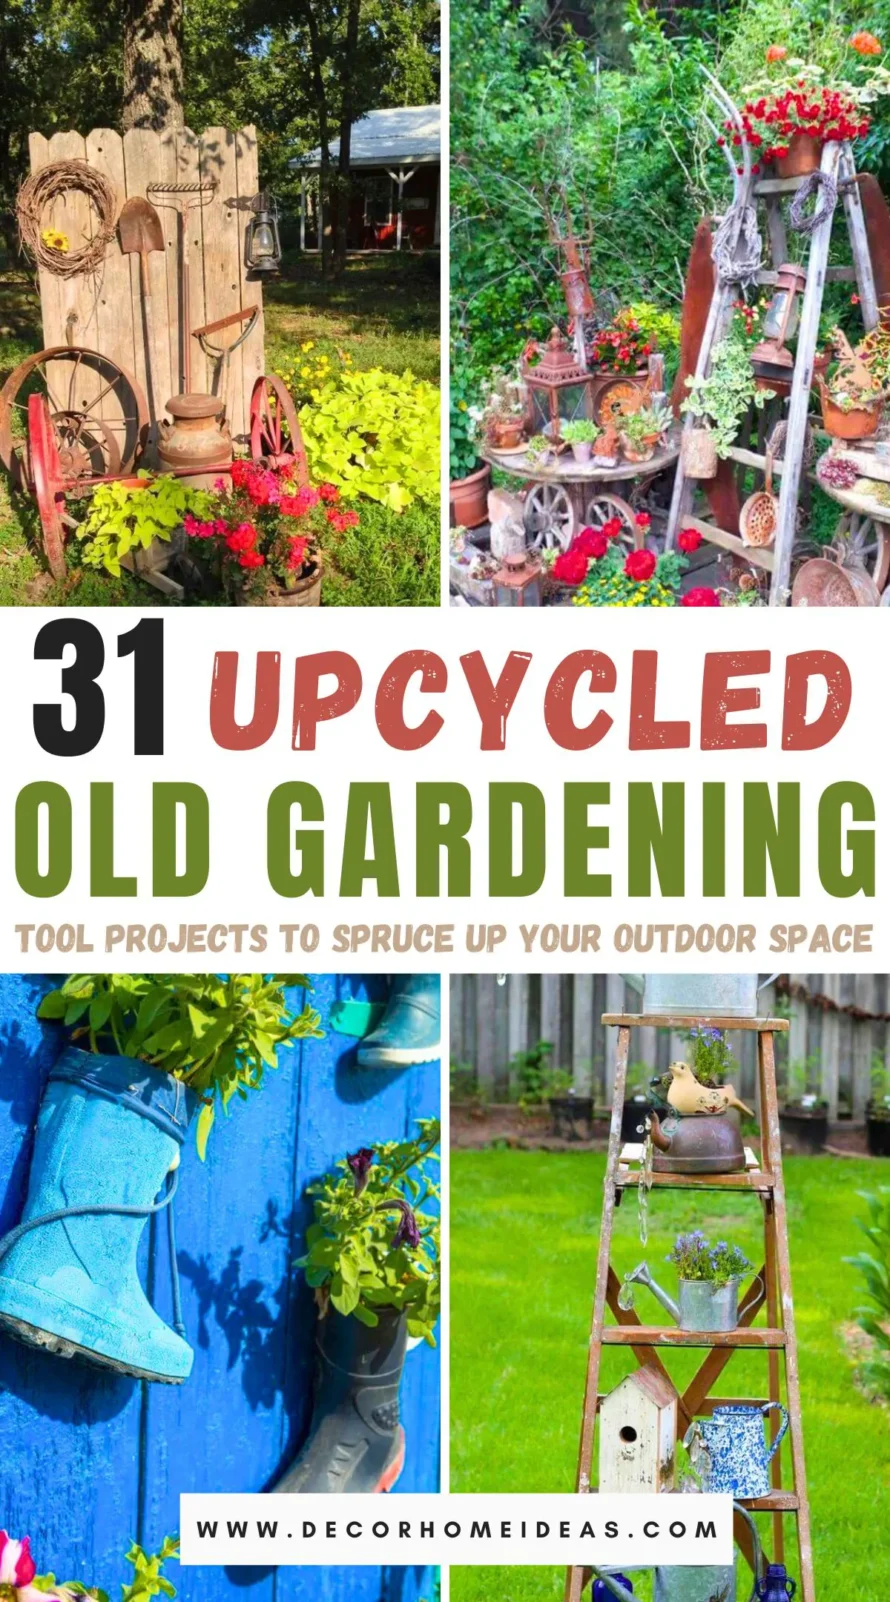 Discover creative ways to transform your old gardening tools into stunning outdoor decor with our collection of 31 upcycled projects. From quirky planters to unique garden art, these DIY ideas will add charm and personality to your garden. Dive in to find inspiration for your next weekend project!